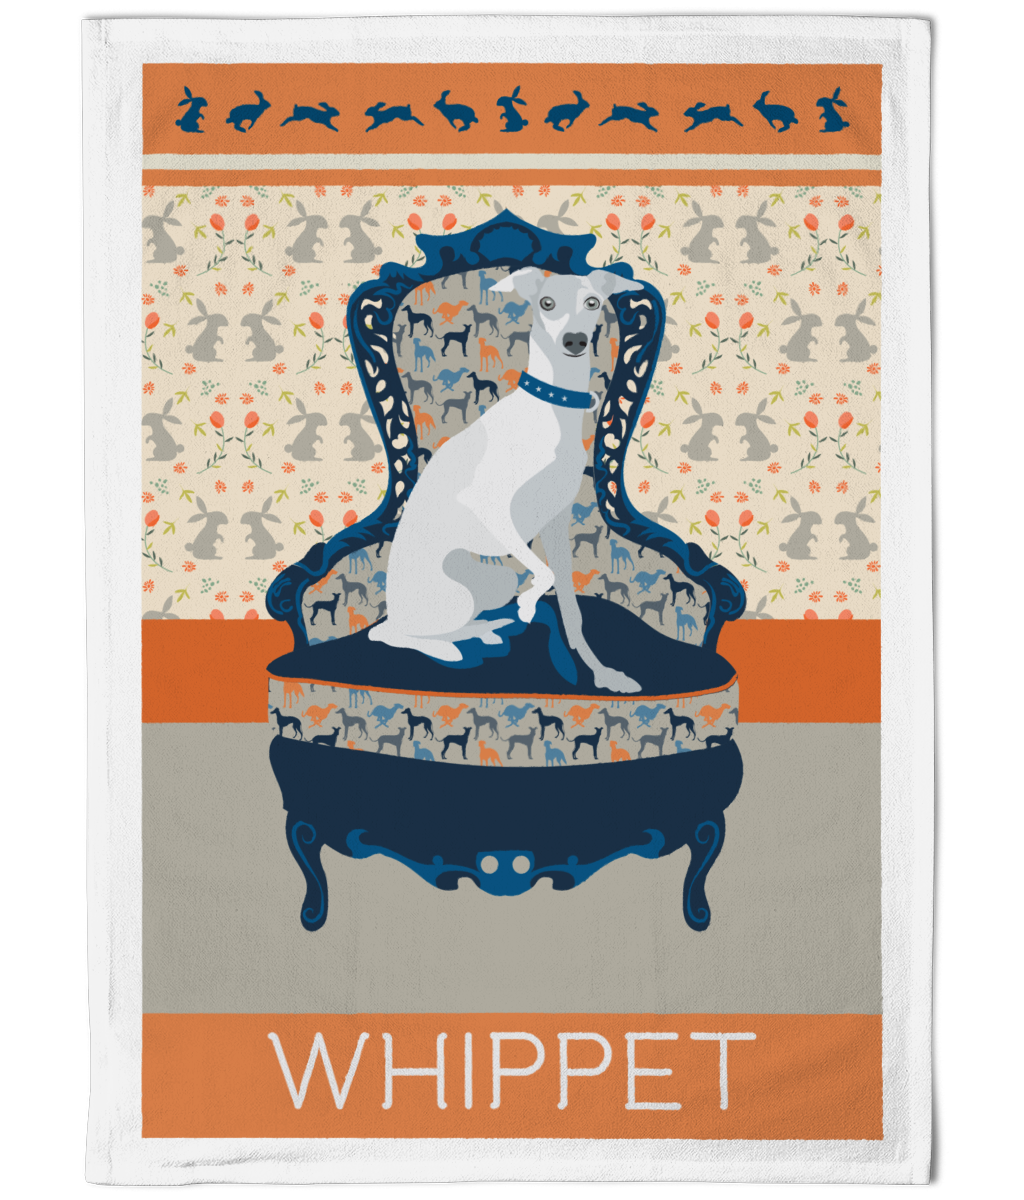 Whippet Cotton Tea Towel - Oranges and Navy